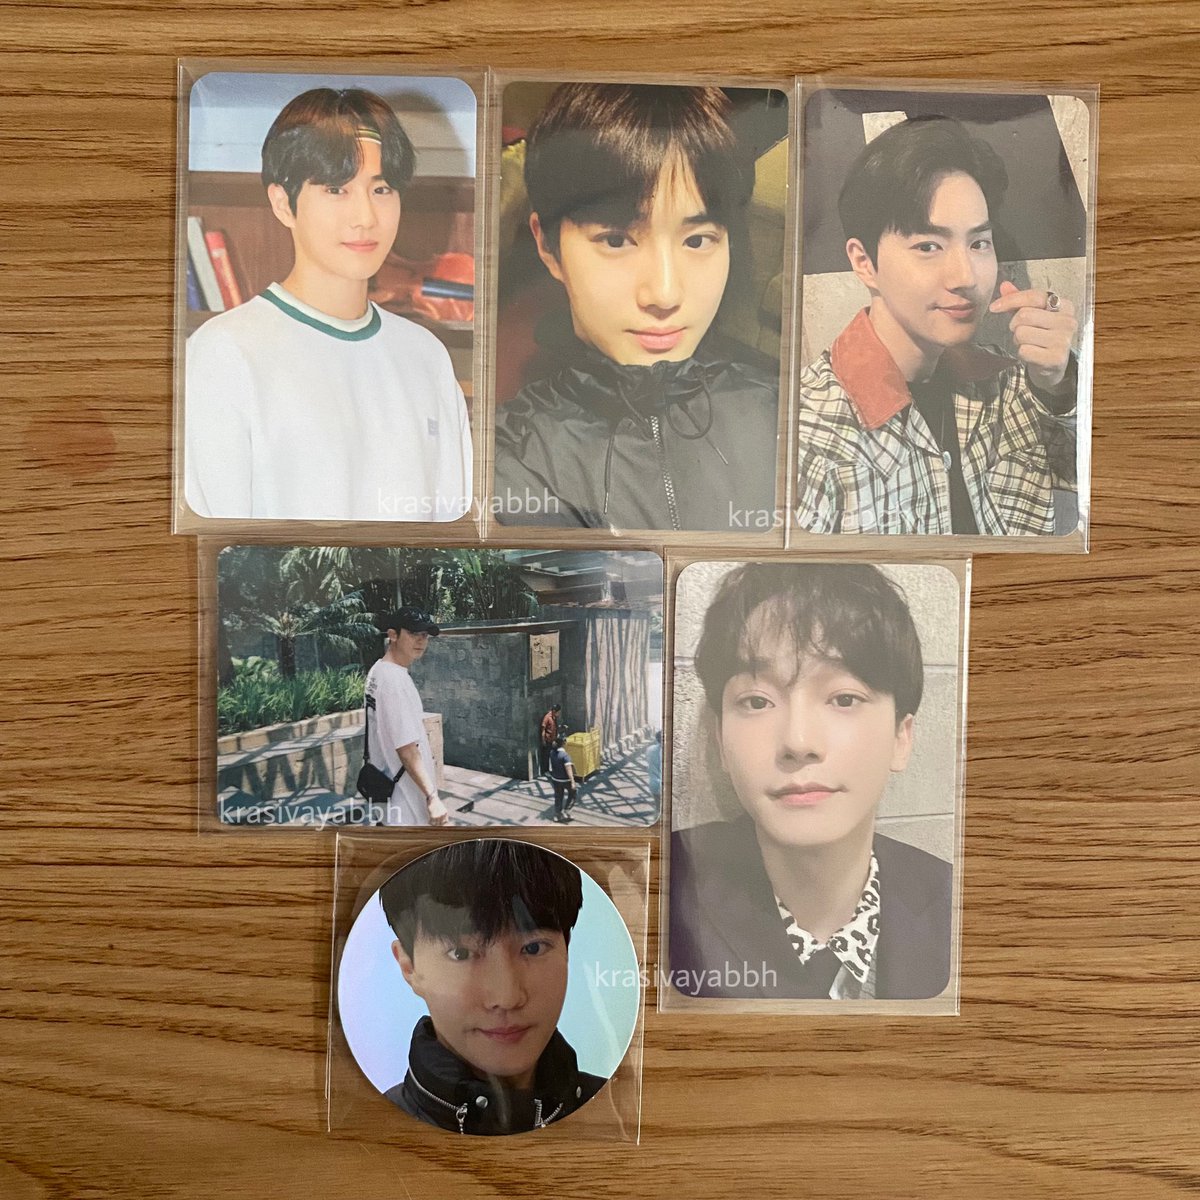 Wts || want to sell lfb 
• Suho cawall exploration dot
• Suho snackbag
• Suho mecima grey suit
• Chanyeol adp bali
• Chen pp sg 2021

📍 Jateng (ina)
💸 Offer by dm
• Shopee ✔️
• Keep event ✔️
• Exclude fee shopee

#ขายของสะสมexo 엑소 포카 exo poca pc photocard